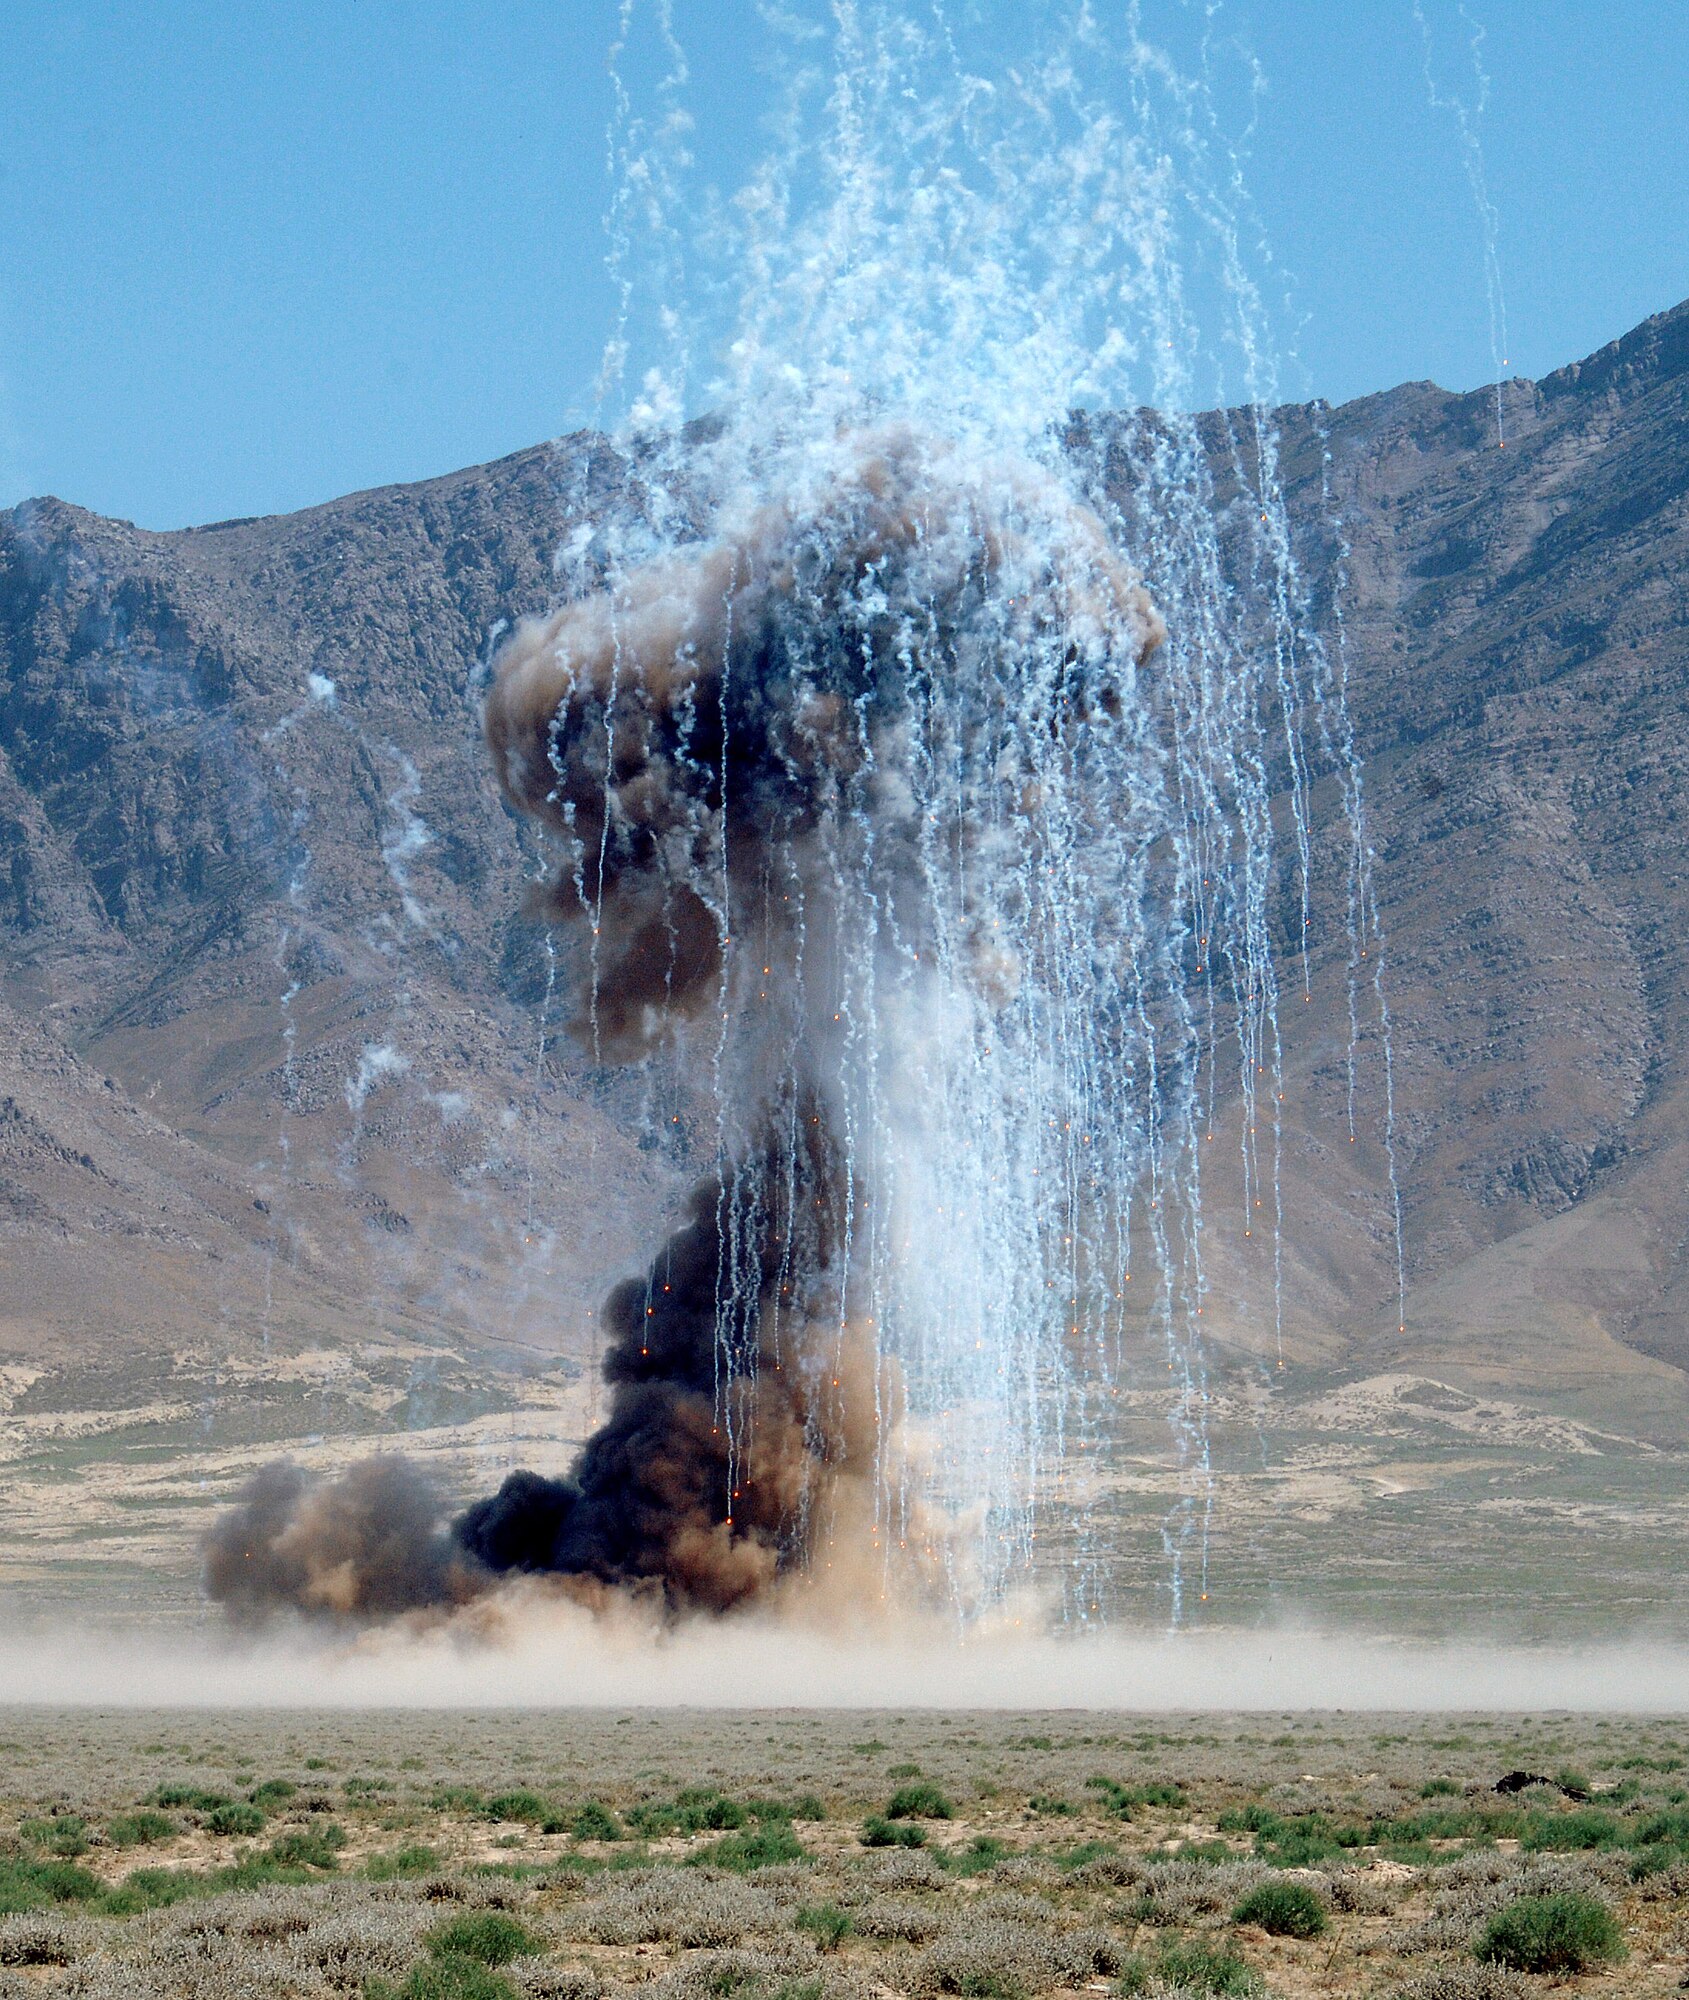 This is the explosion as the 755th Expeditionary Explosive Ordnance Disposal detonation team disposes of over 1,000 pounds of stored munitions, mines, and weapons caches at a controlled detonation outside of Bagram Airfield, Afghanistan June 13. (photo by Staff Sgt. Craig Seals)